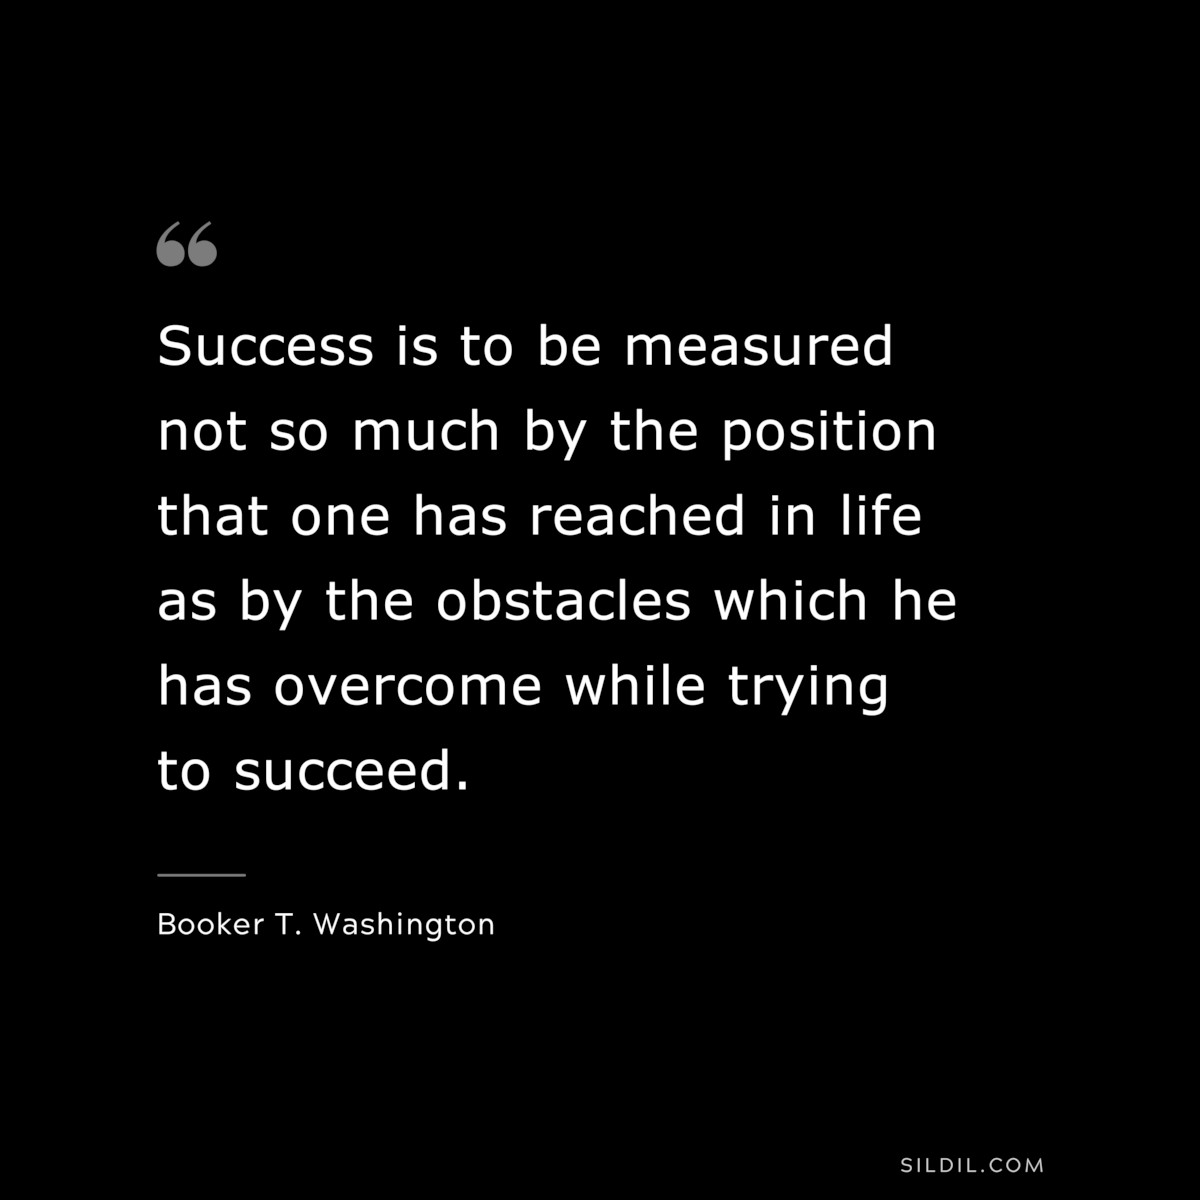 Success is to be measured not so much by the position that one has reached in life as by the obstacles which he has overcome while trying to succeed. ― Booker T. Washington